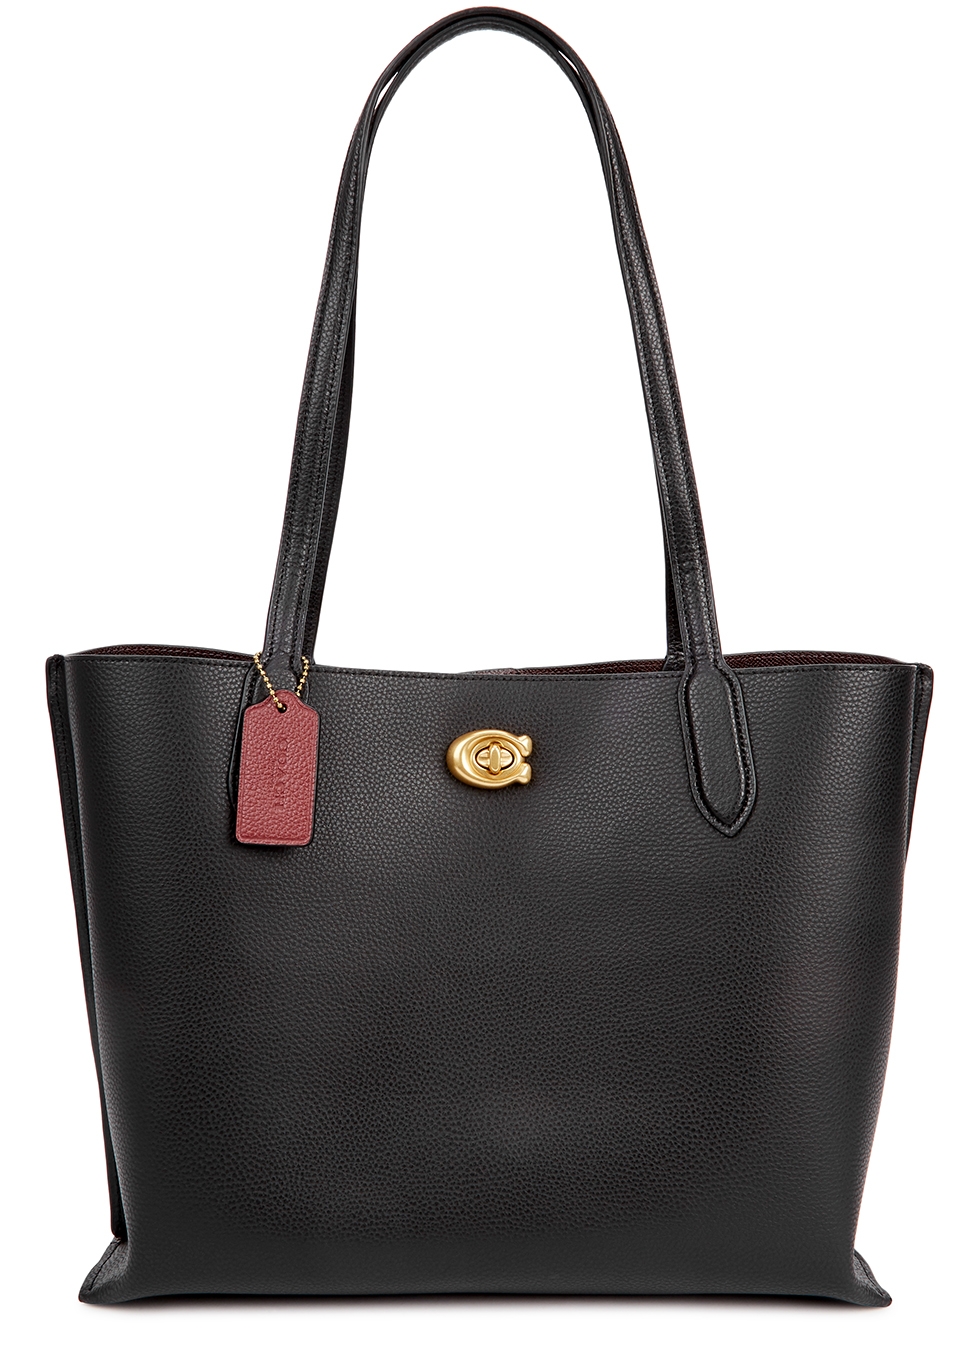 Willow black grained leather tote